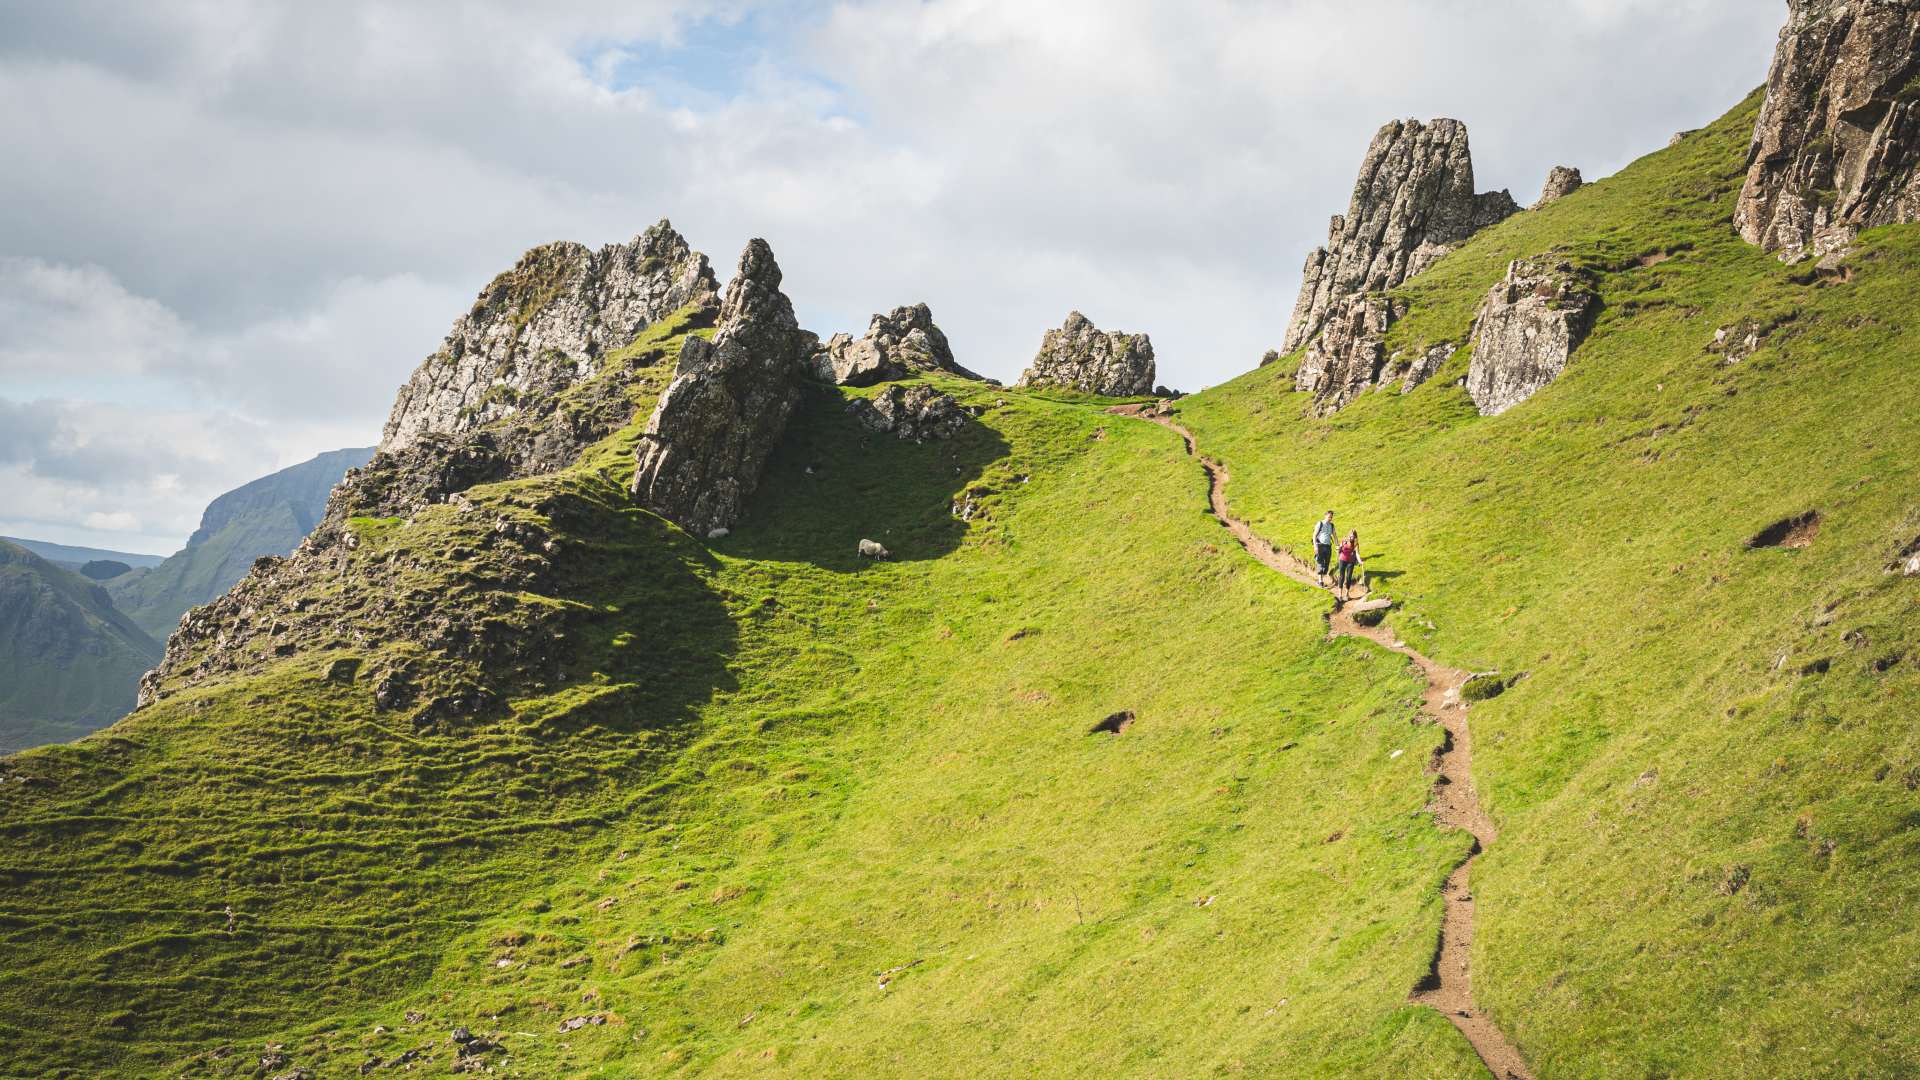 People hiking along a path at the Quiraing, Isle of Skye, Scotland